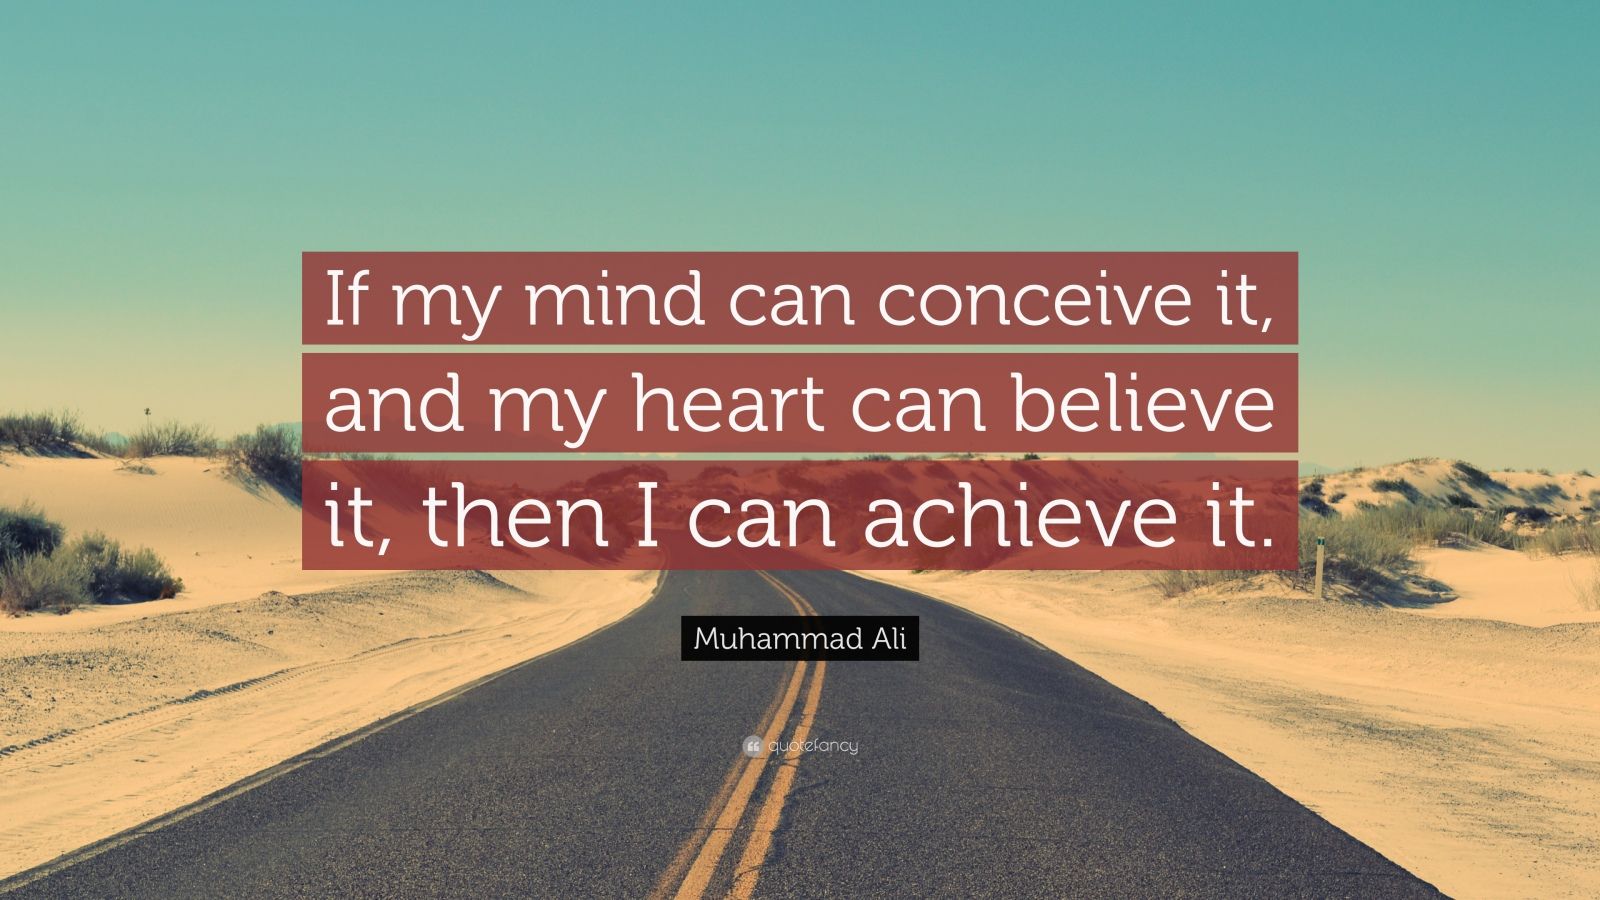 Muhammad Ali Quote: “If my mind can conceive it, and my heart can